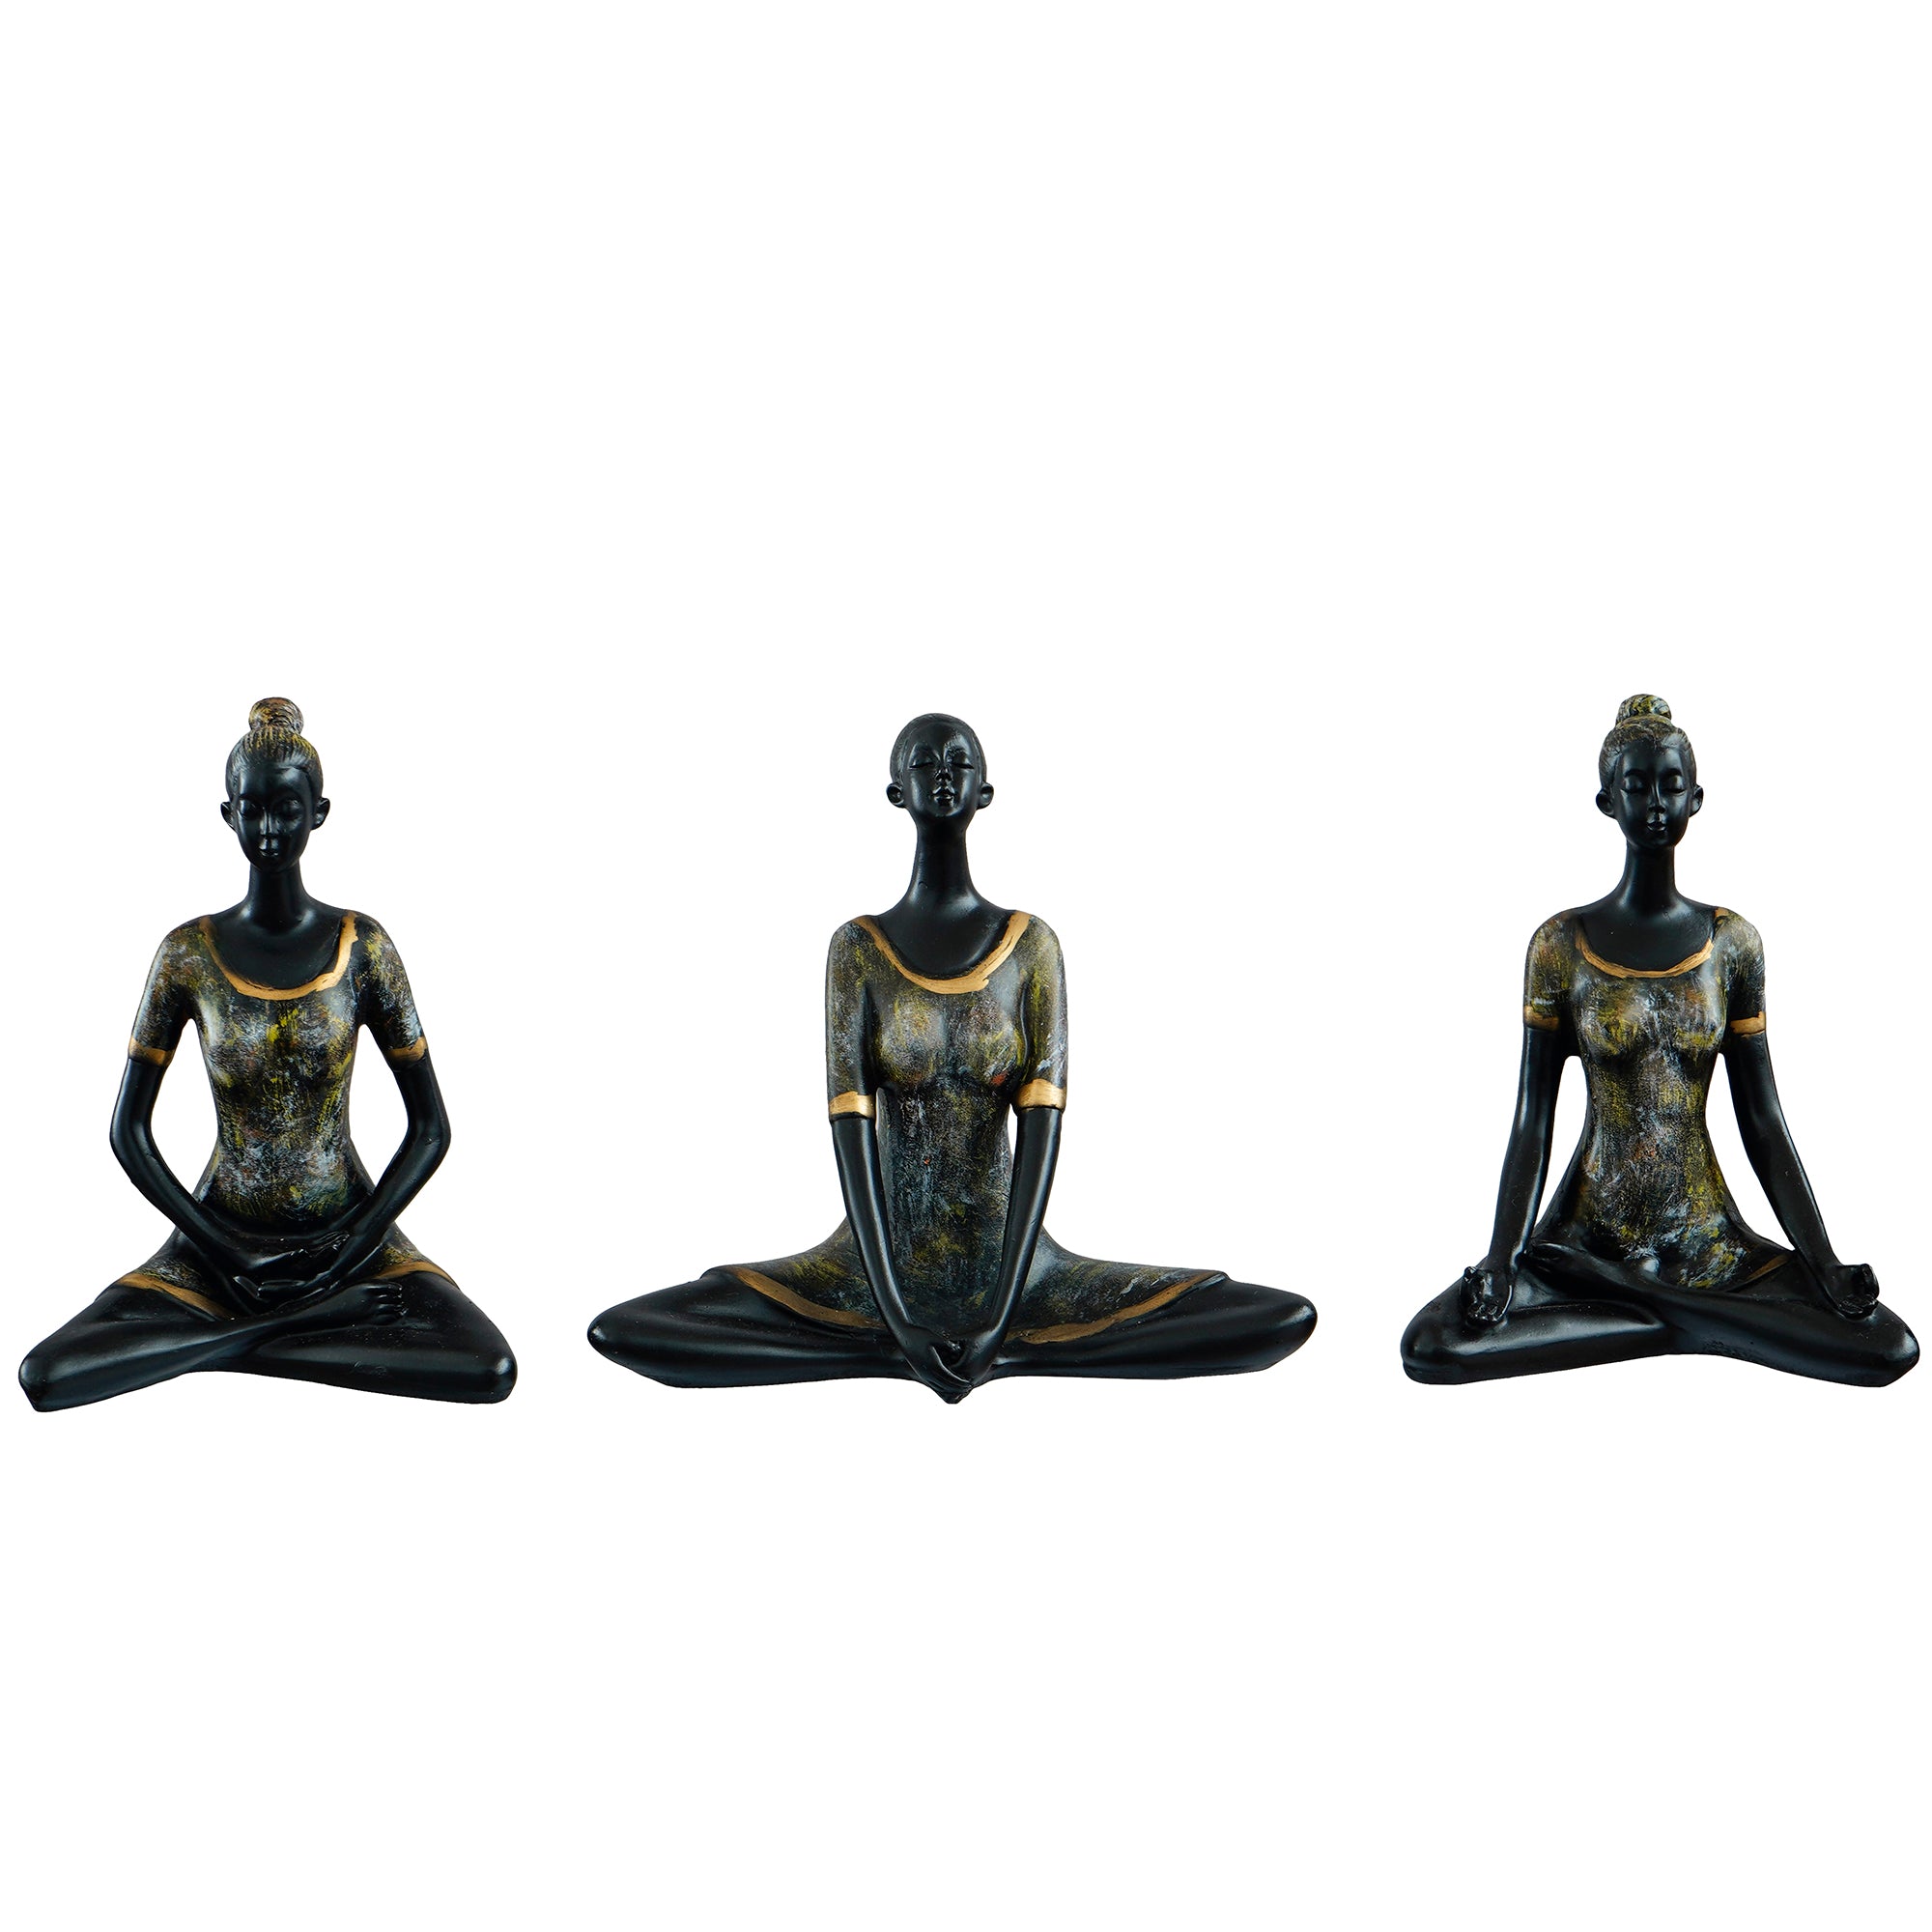 Set of 3 Ladies in Sukhasana, Padmasana, Butterfly Yoga Poses Handcrafted Decorative Polyresin Showpieces 4